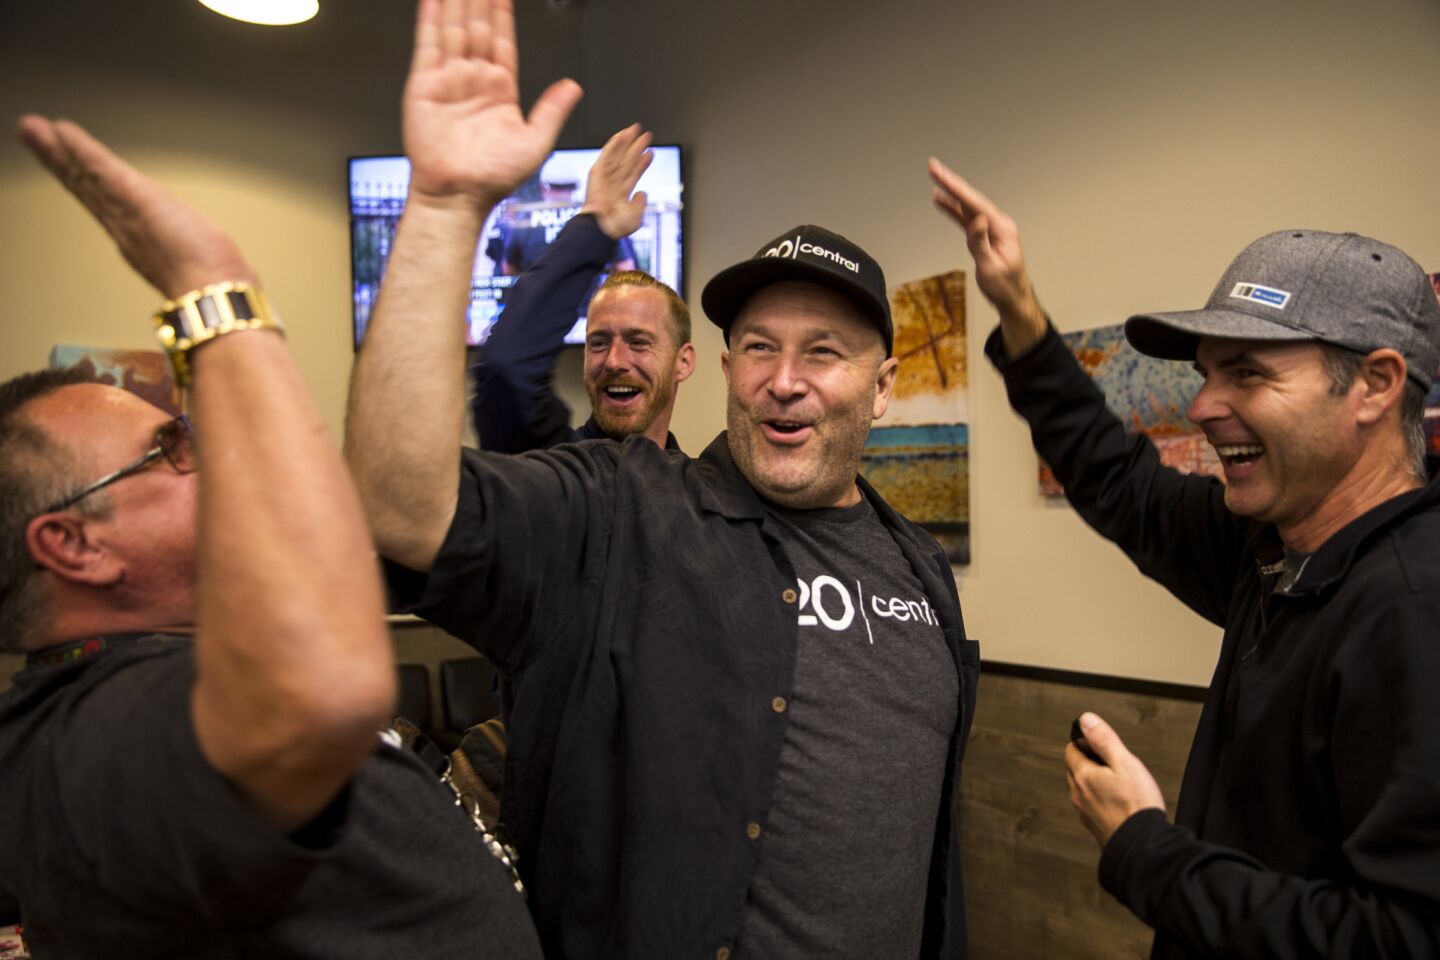 Robert Taft Jr., center, founder of the medical marijuana dispensary 420 Central in Santa Ana, high-fives workers Sunday. “Being part of history is an amazing thing,” he says.